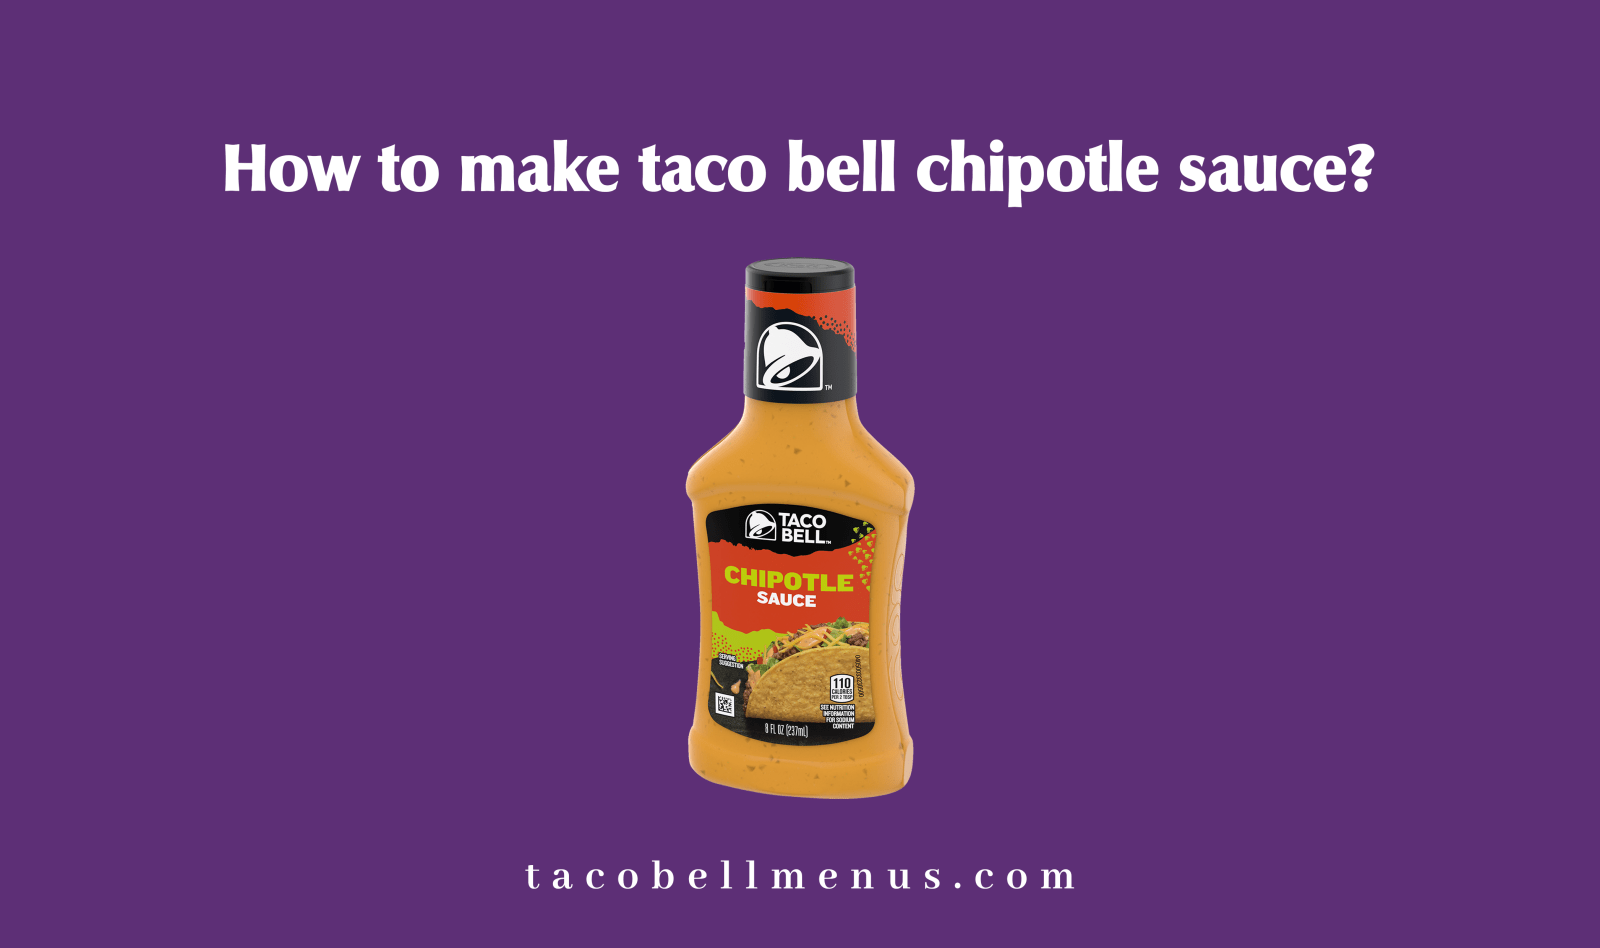 How to make taco bell chipotle sauce?